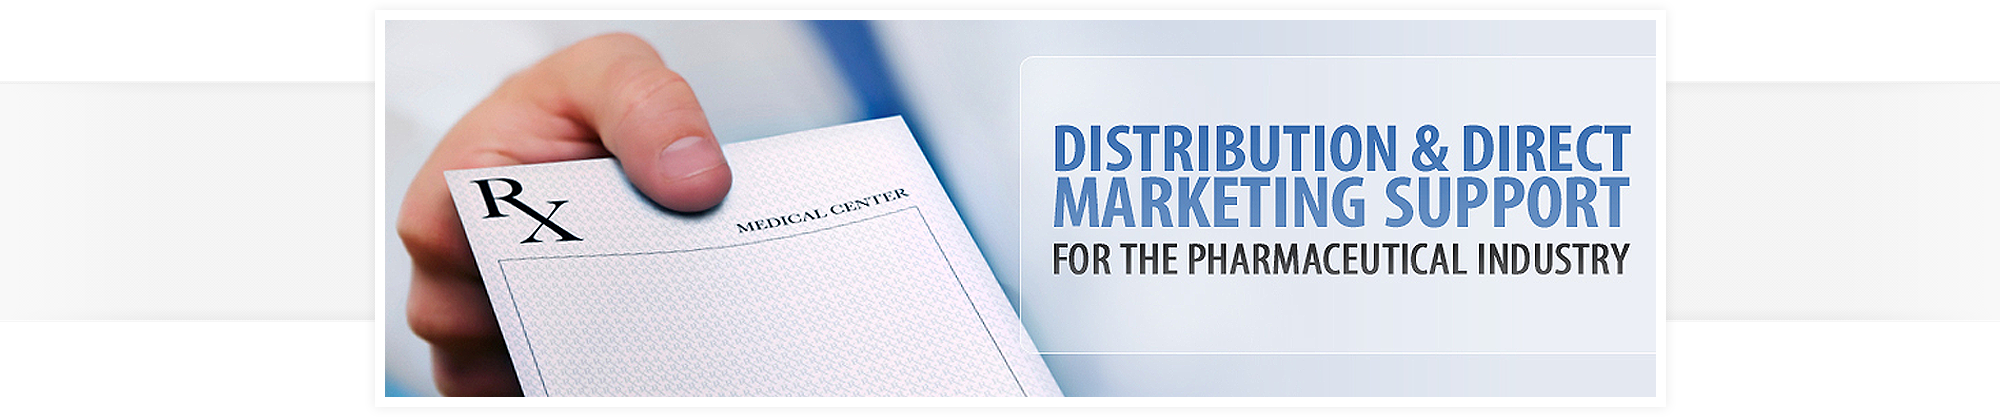 Distribution and Direct Marketing Support